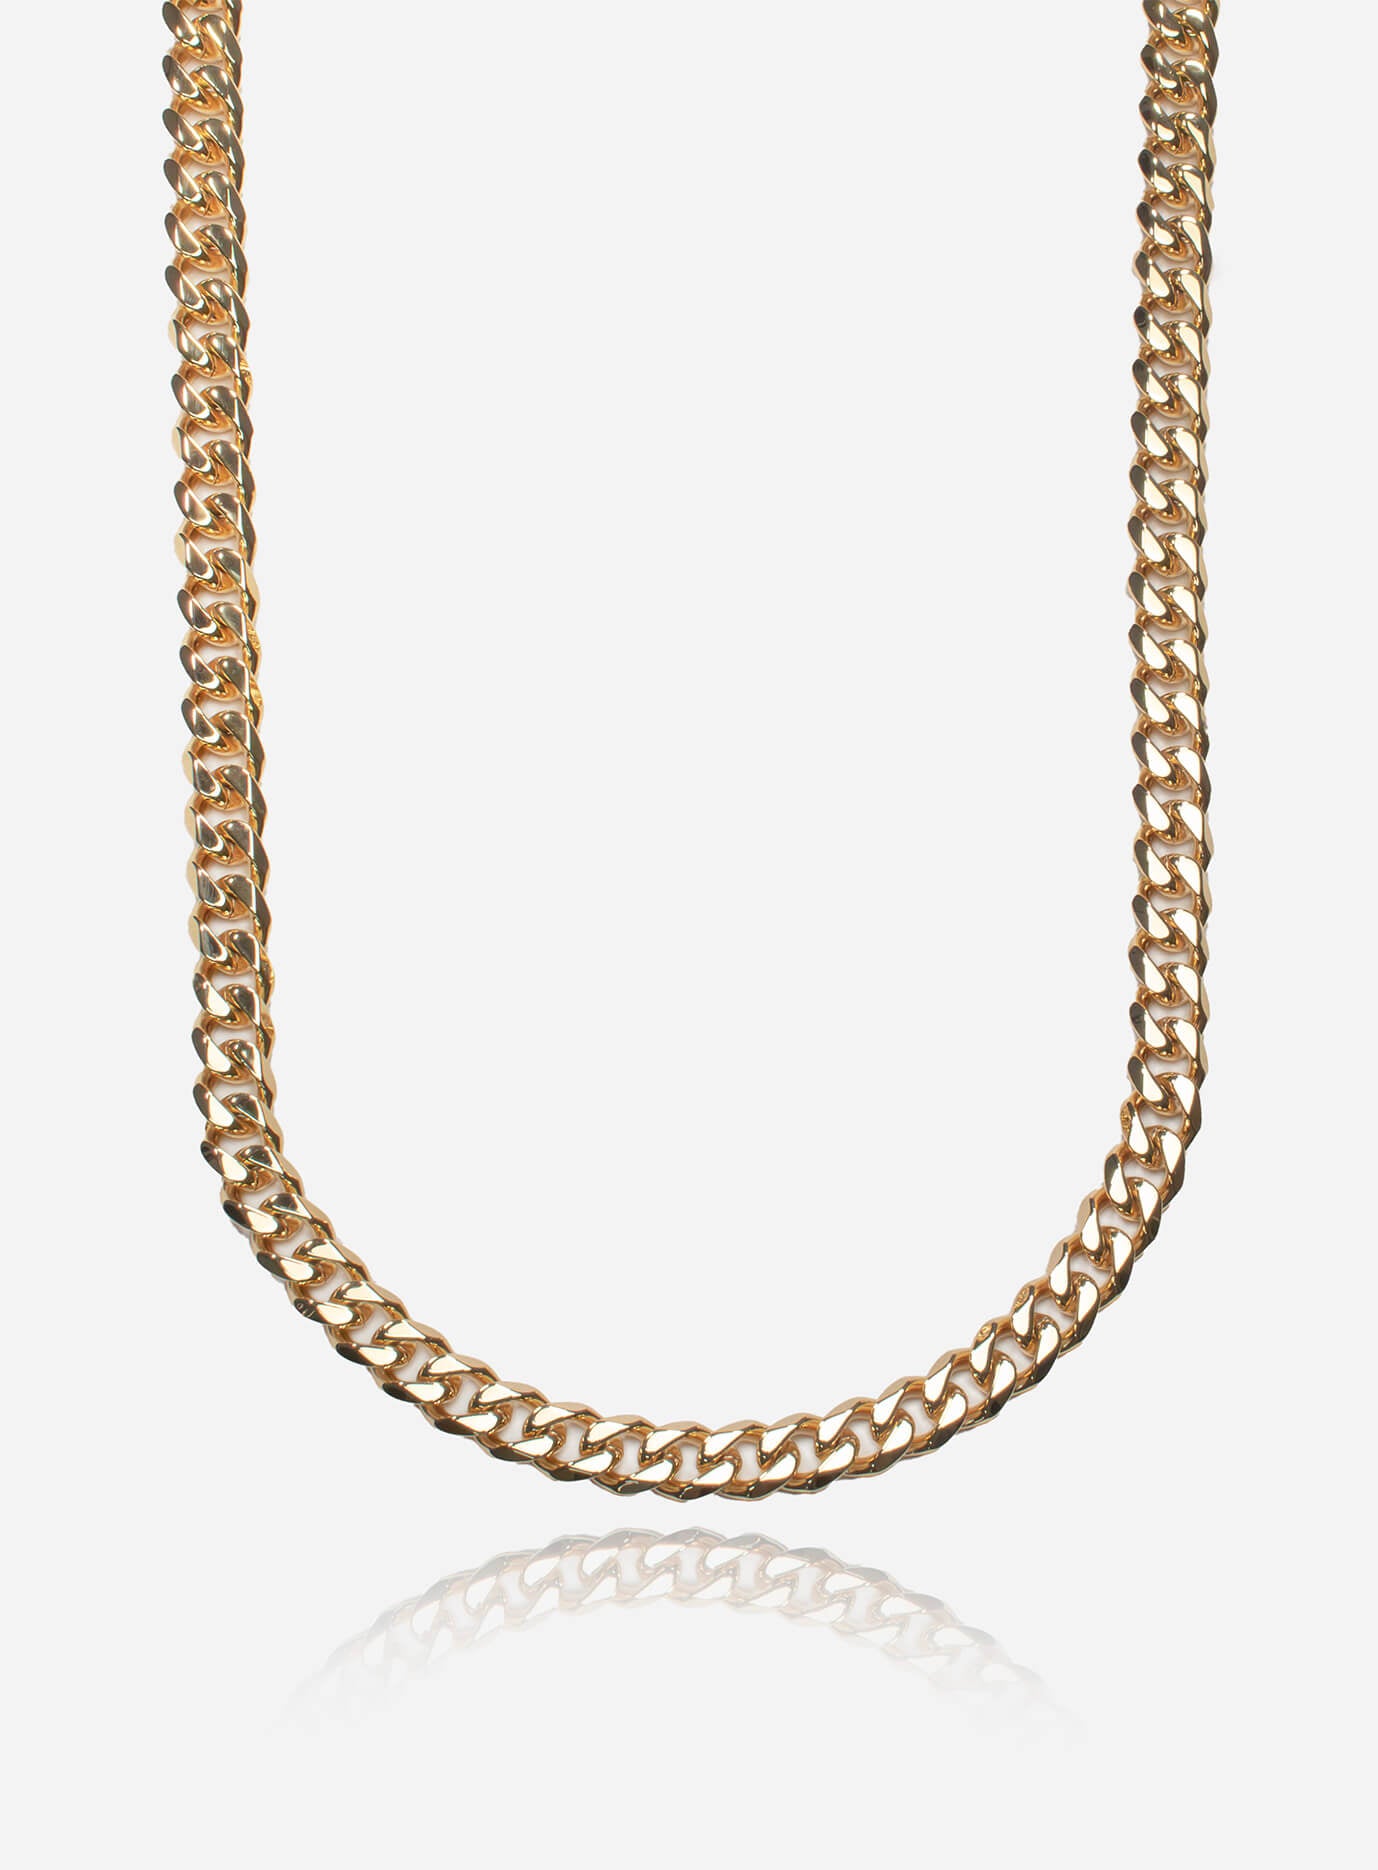 GD Stainless Steel Plated Chain 10.5mm x 61cm